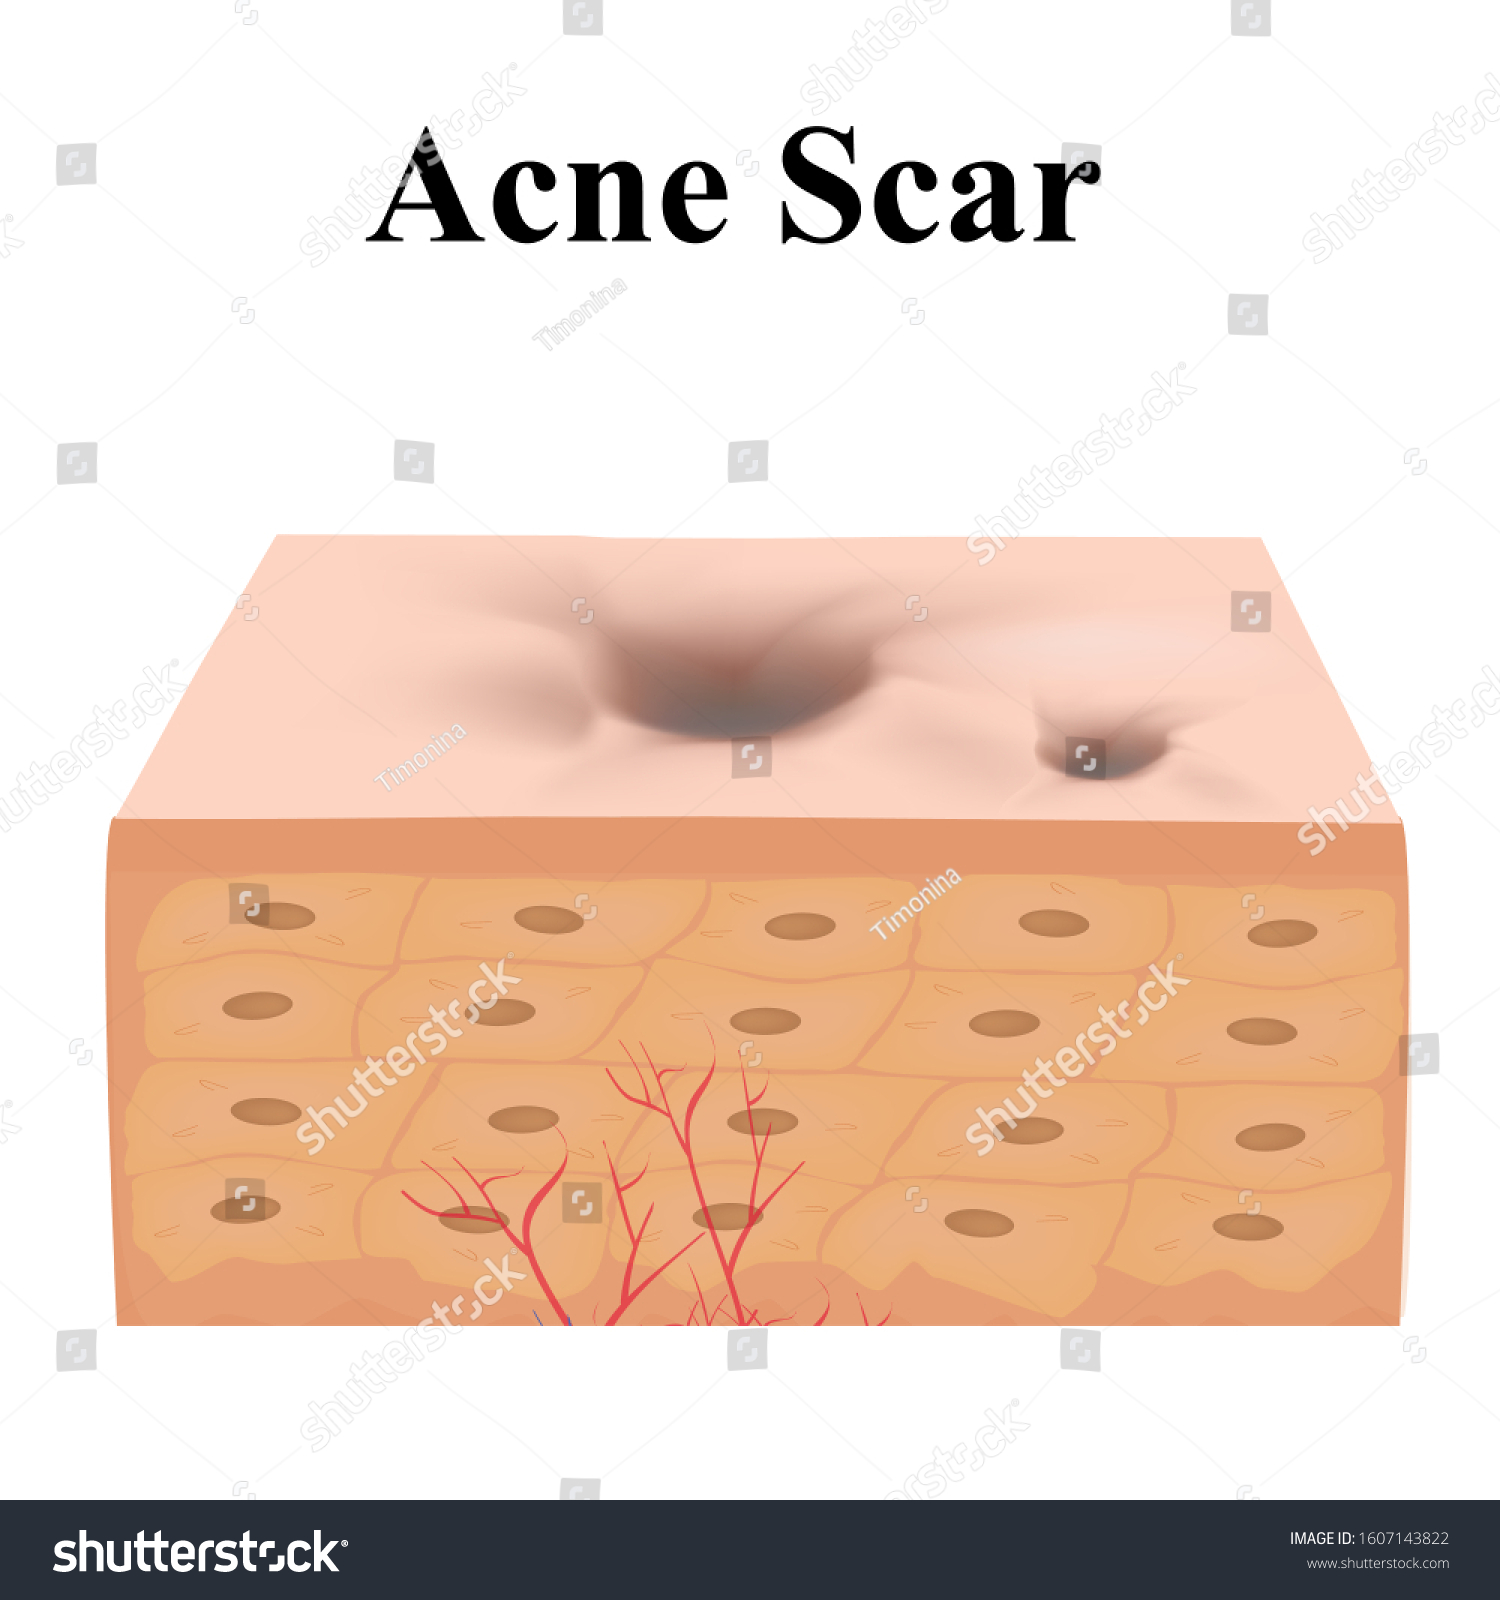 Atrophic Scars Acne Scar Anatomical Structure Stock Vector (Royalty ...